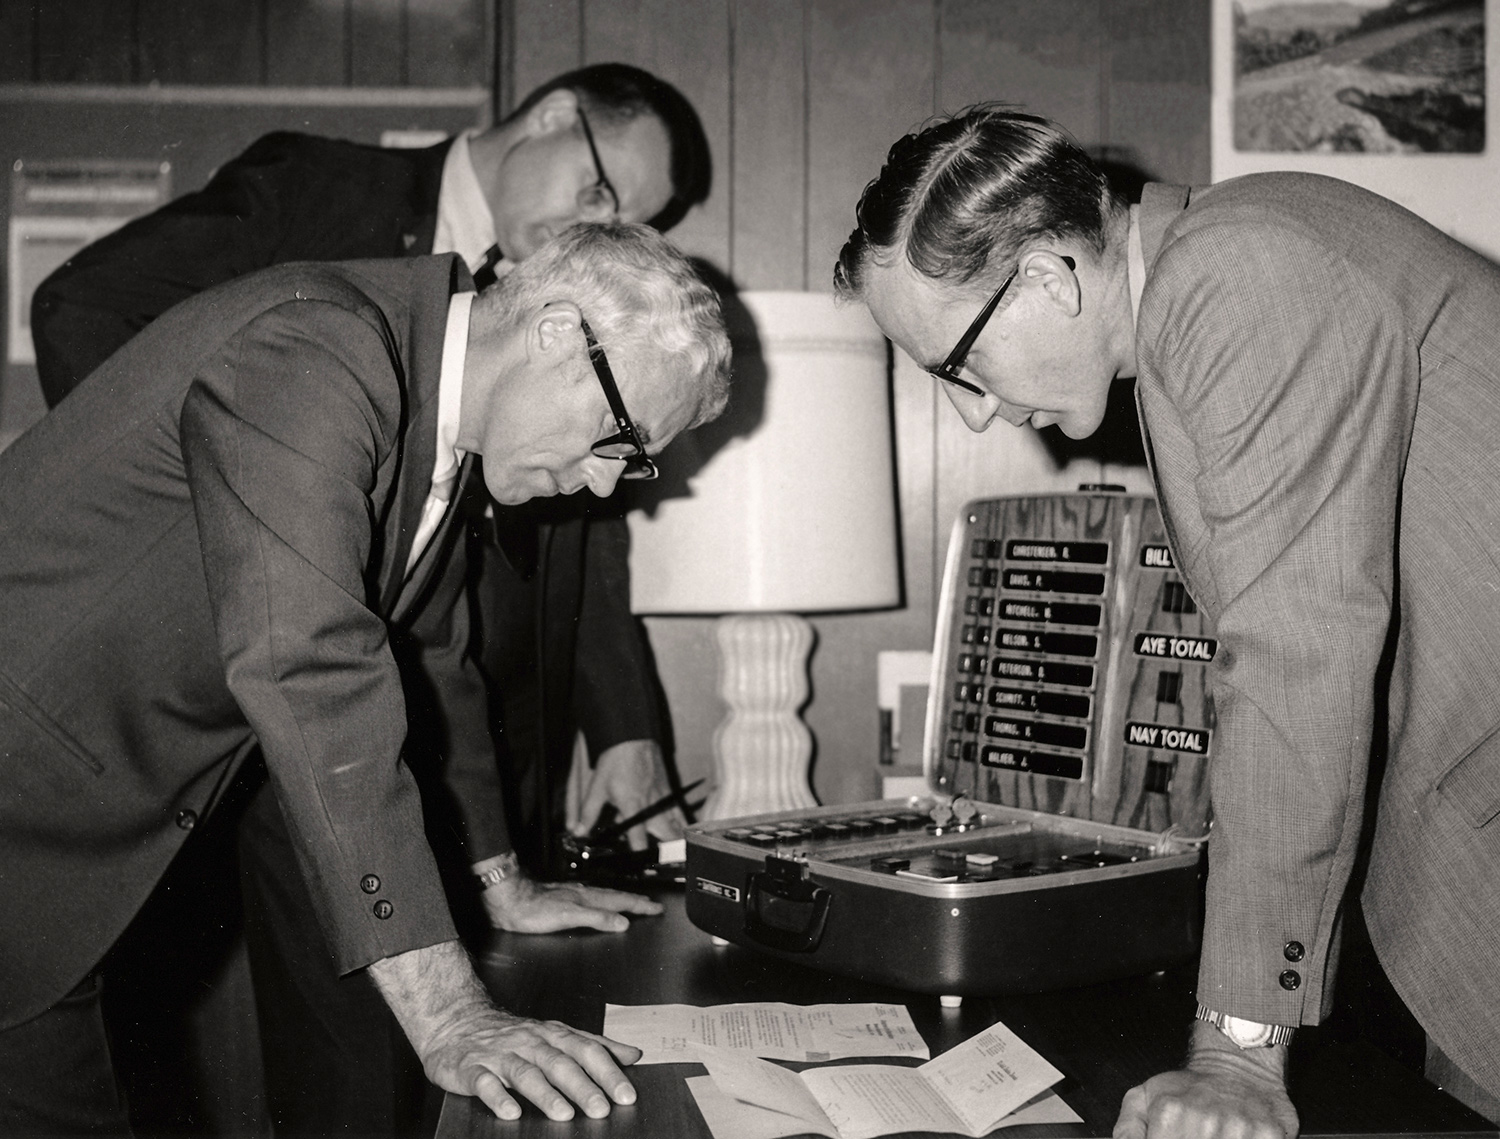 Black and white photo from the 1970s with three men in suits and ties in an office look at paperwork and an electronic voting machine on a table in an office. Left, Governor Frank Farrar, unknown man behind governor, Al Kurtenbach on the right. Photo courtesy of Daktronics.